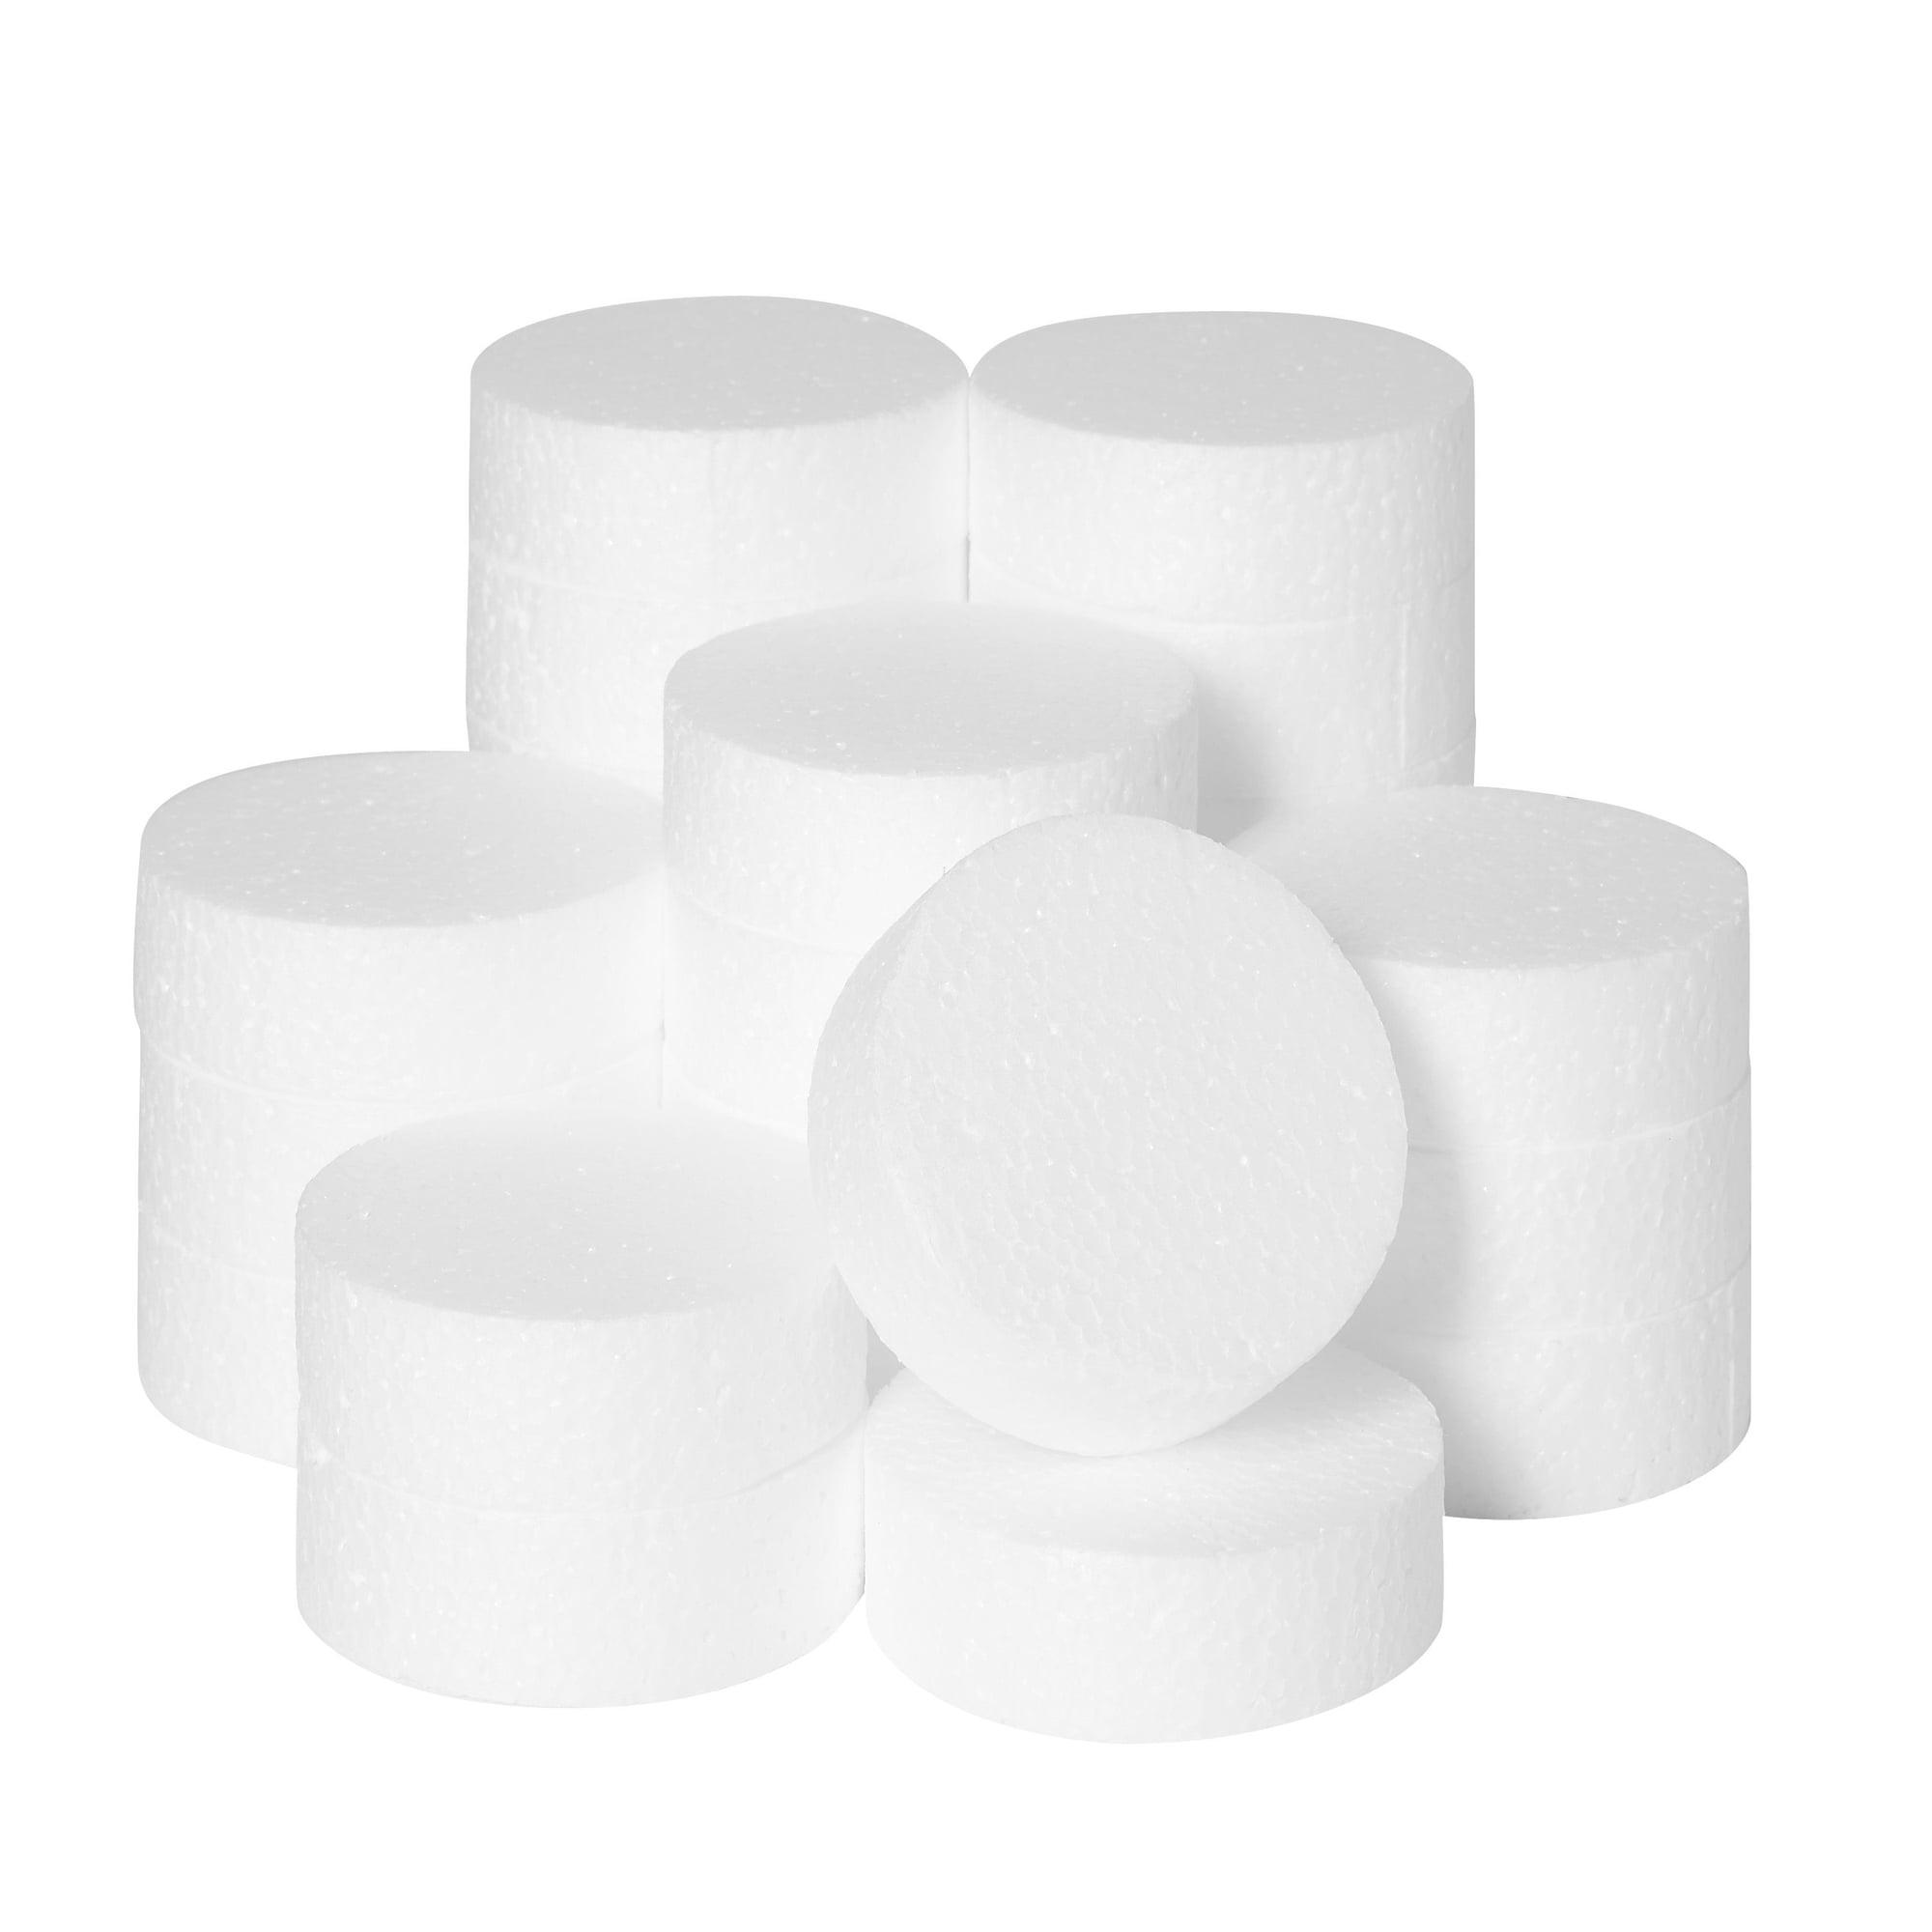 8x8 Inch Round Foam Circles for Crafts and DIY Projects 1 Inch Thick (White  6 Pack)